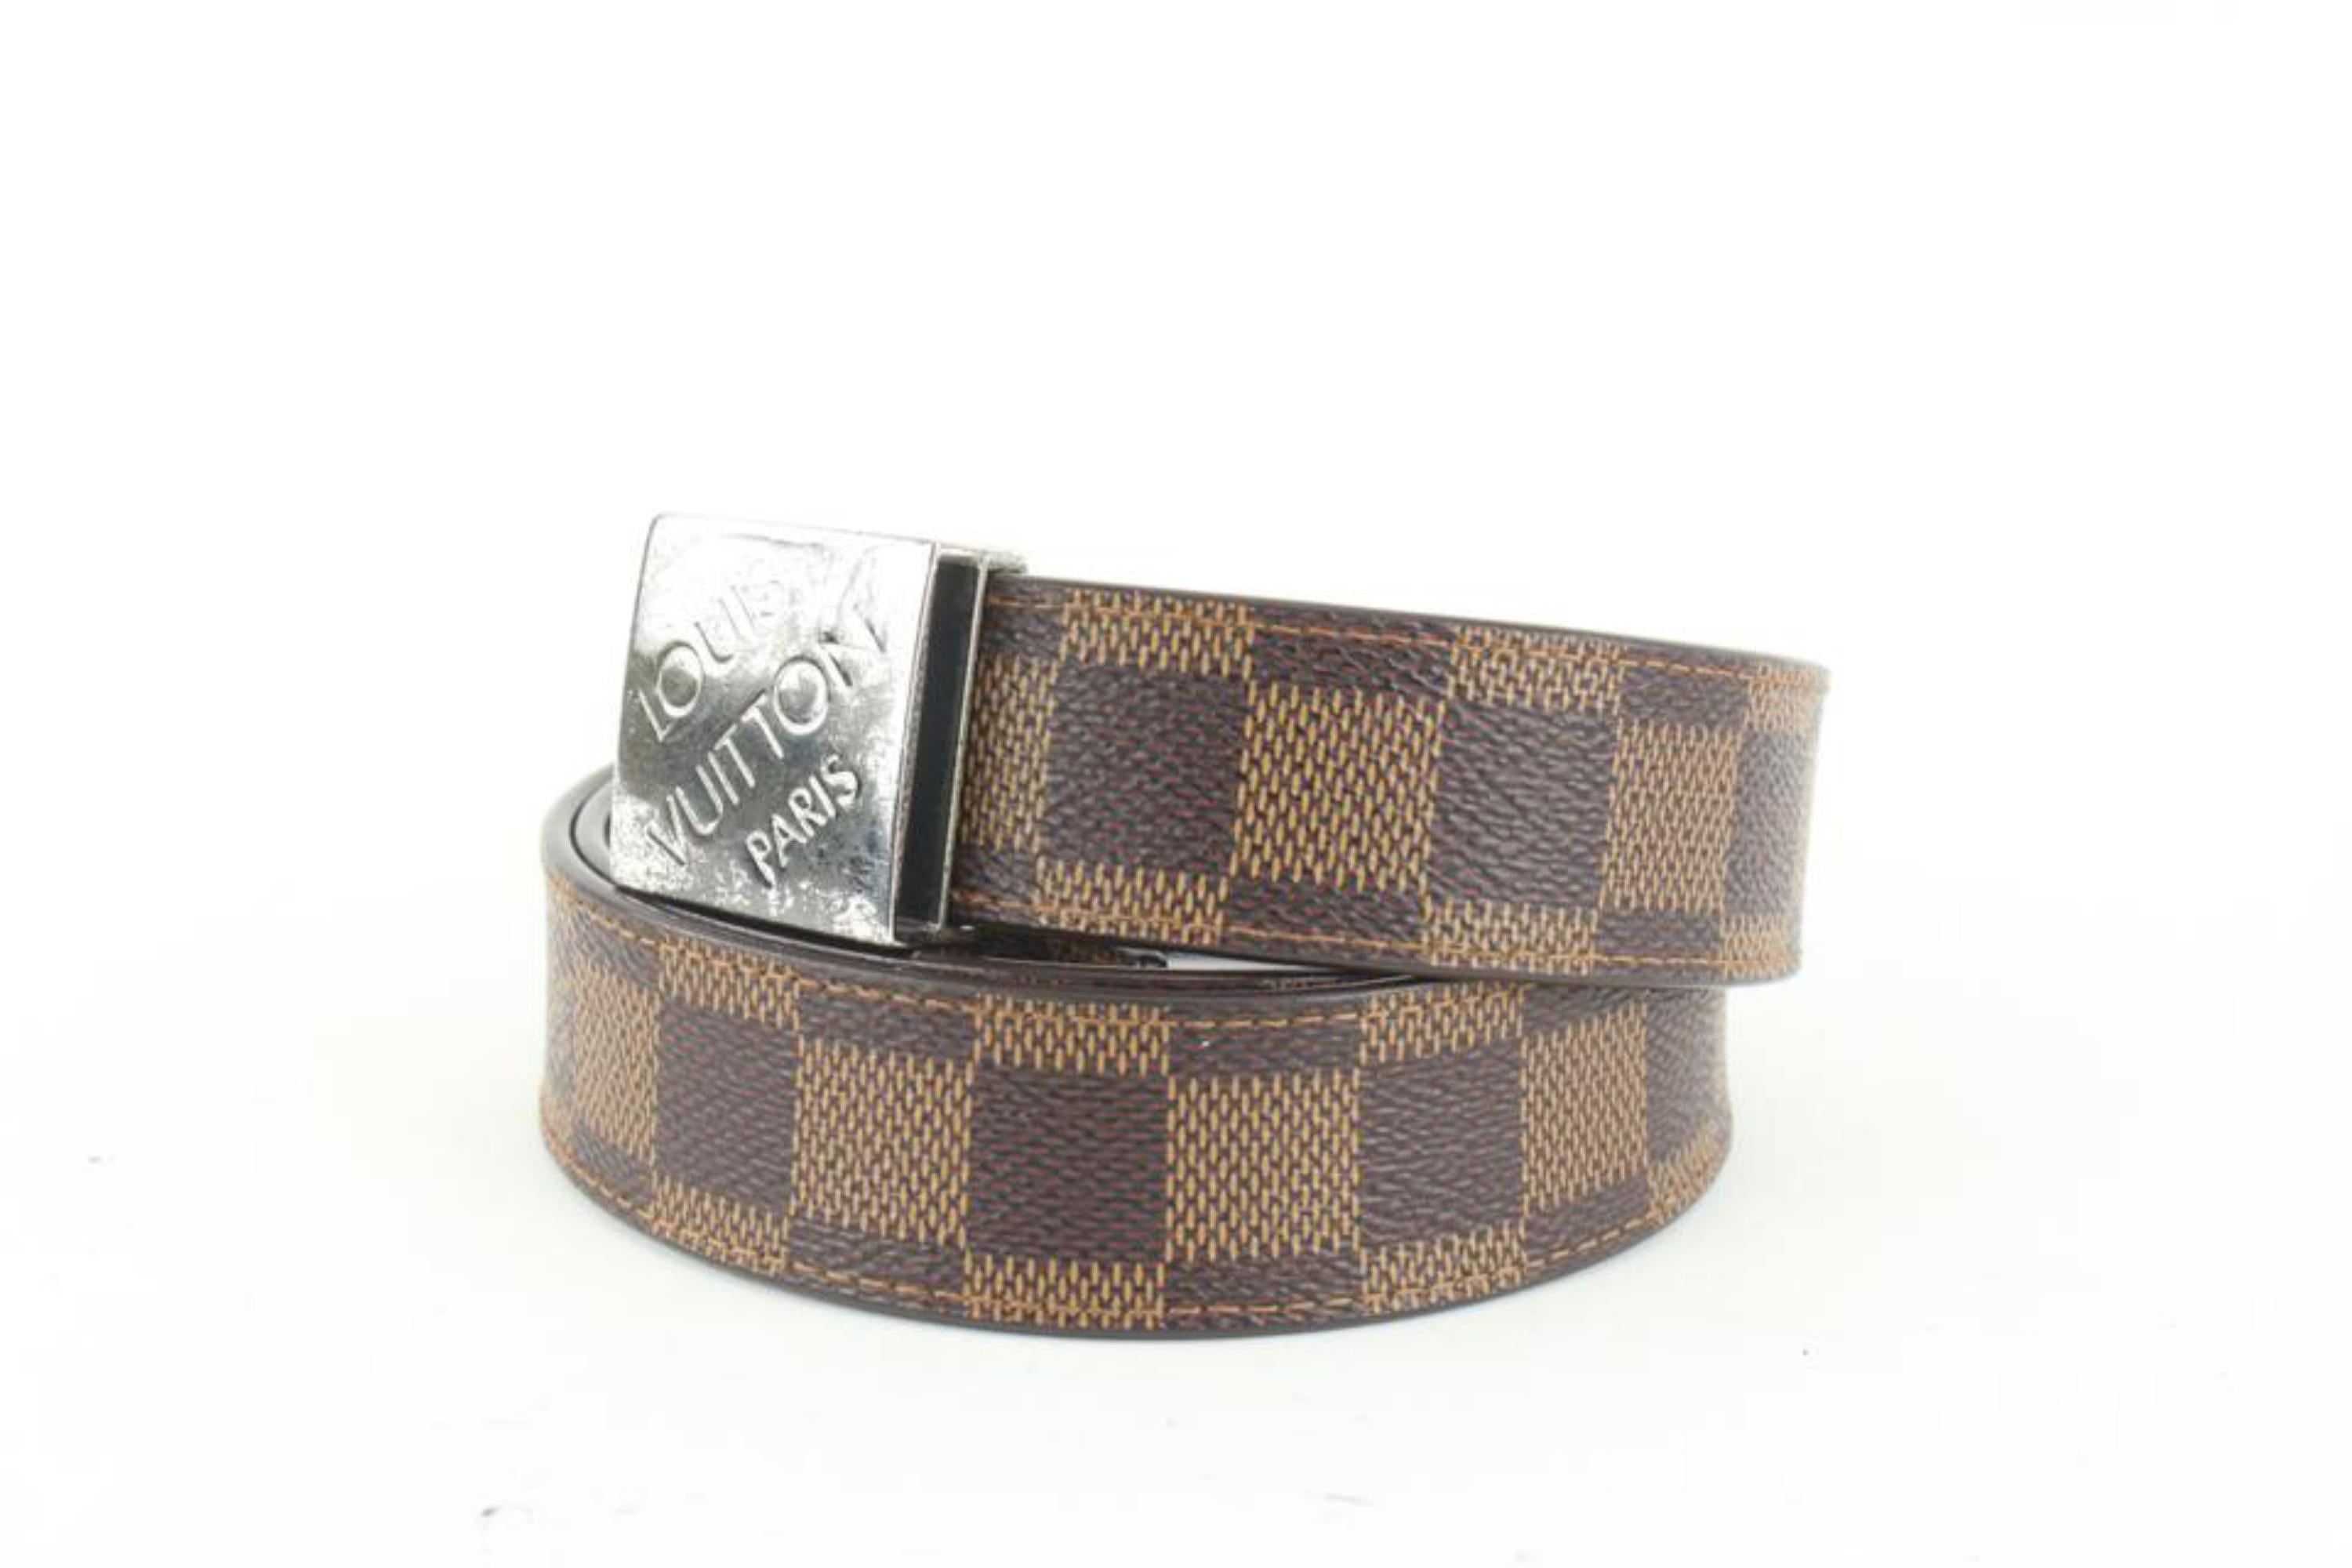 Louis Vuitton 90/36 Damier Ebene Belt 16lv31 In Good Condition For Sale In Dix hills, NY